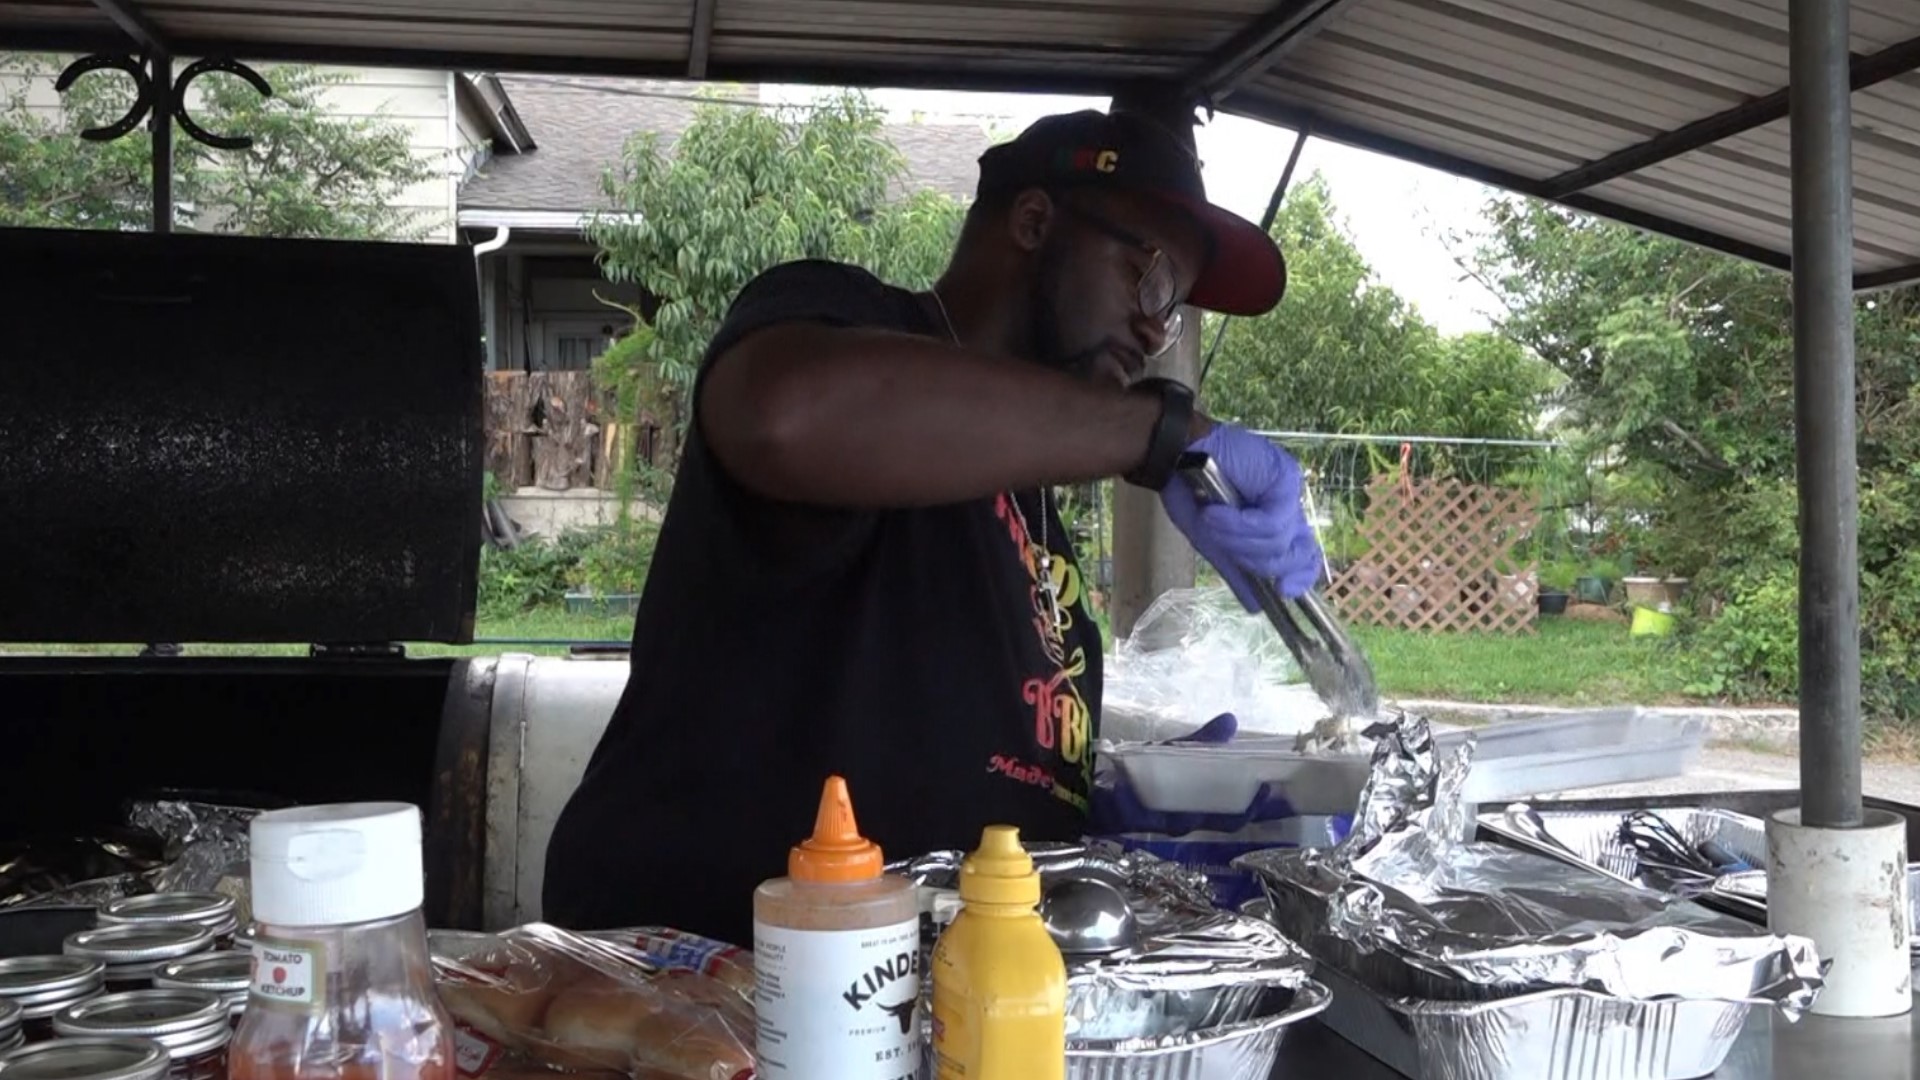 Amidst challenges, Friends BBQ has been smoking up success for 6 years.